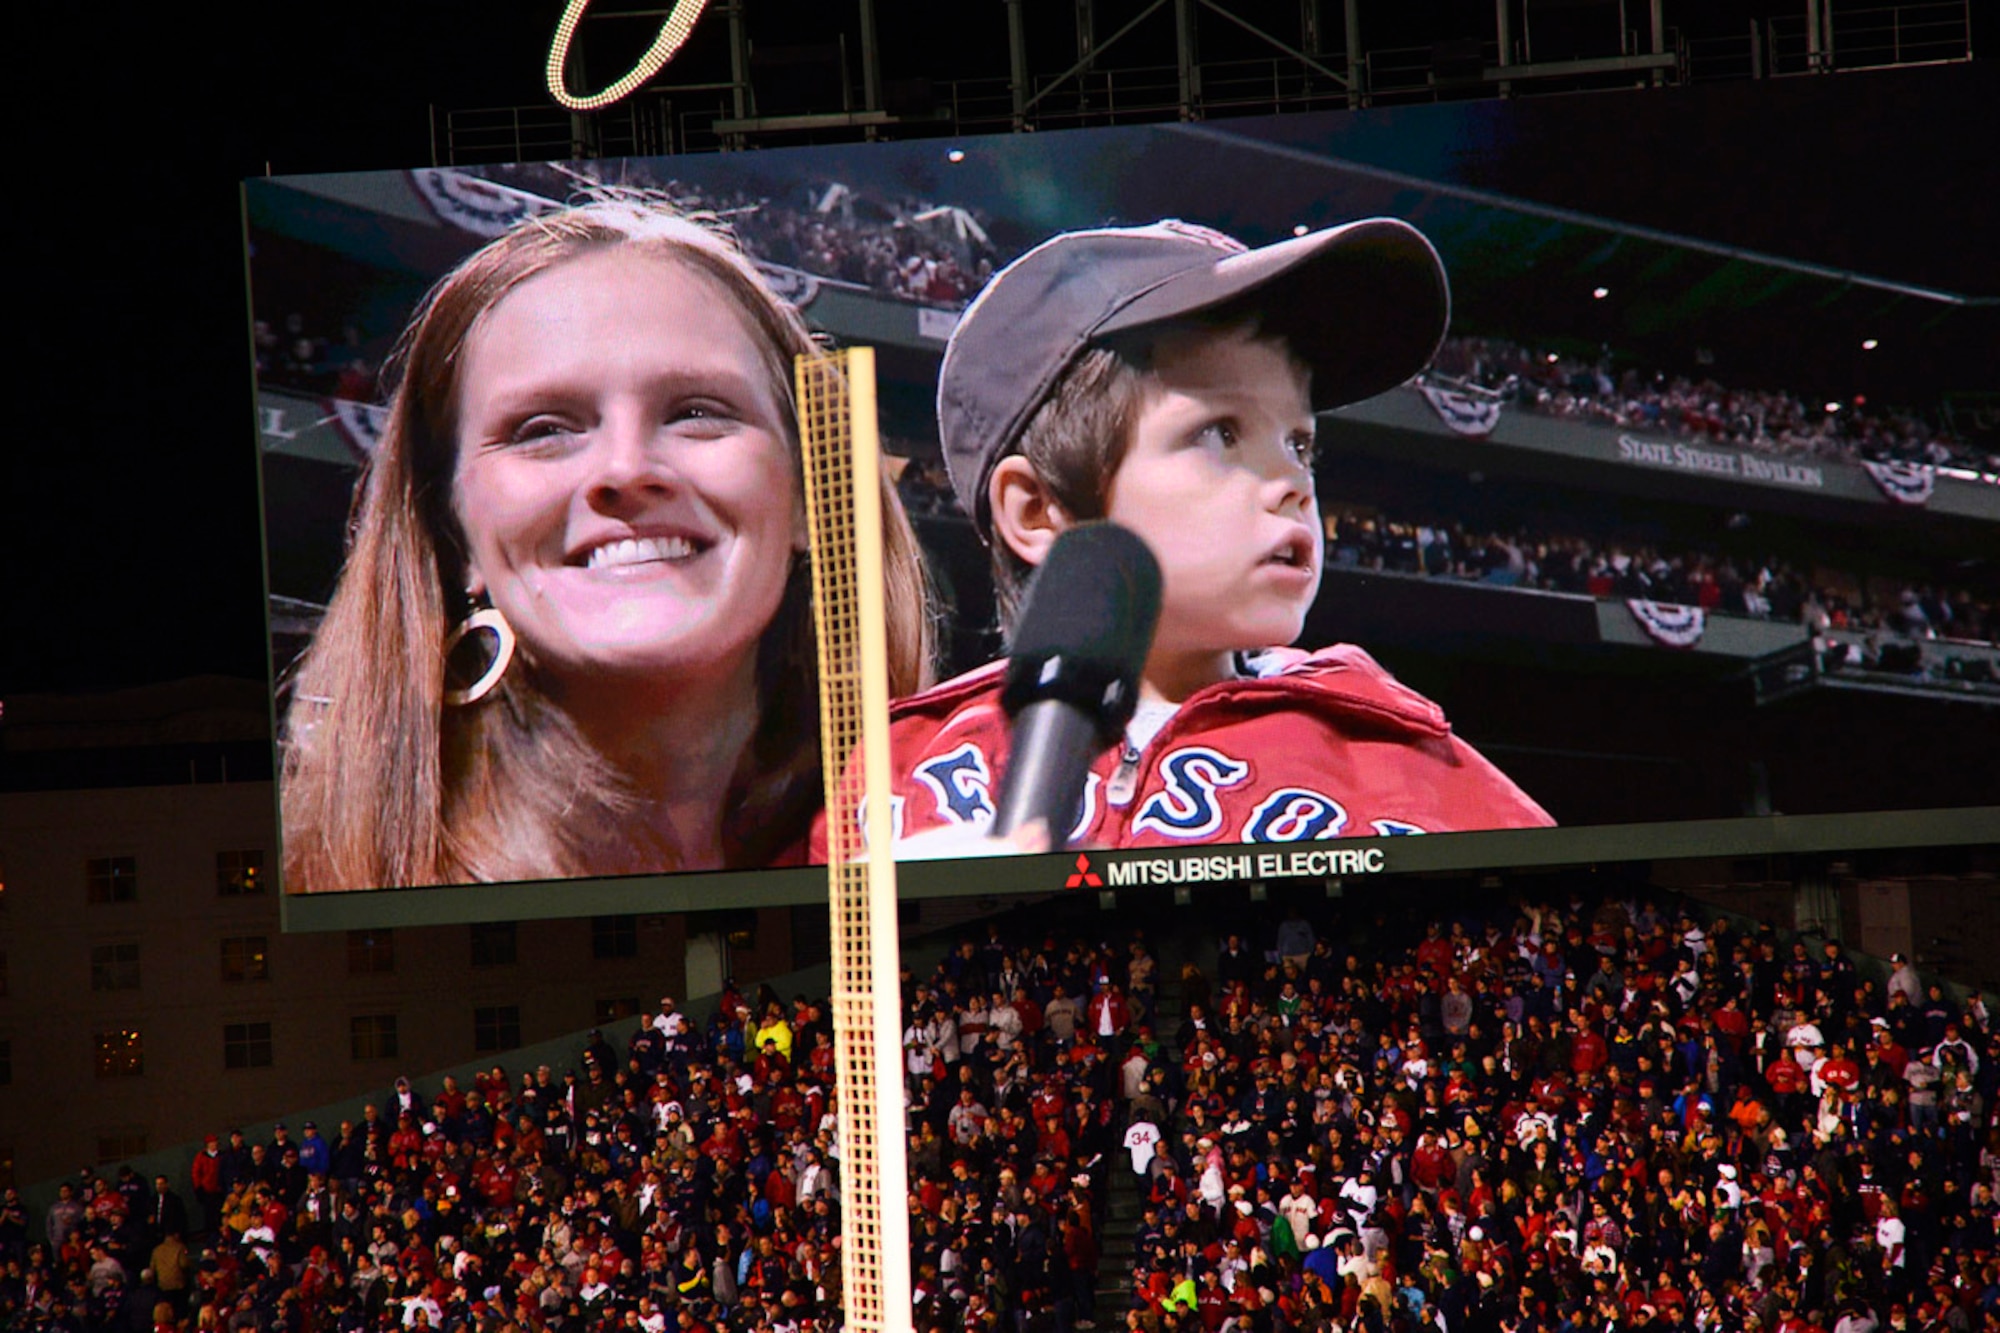 Lindsey Miller holds her 5-year old son Jacoby moments before he declared, "Play Ball" during the pregame ceremony at the start of the 2013 World Series Oct. 23, 2013 at Fenway Park. Jacoby was selected to make the ceremonial call based on his father, Capt. Garrett Miller, being deployed from Hanscom Air Force Base to an overseas location. 